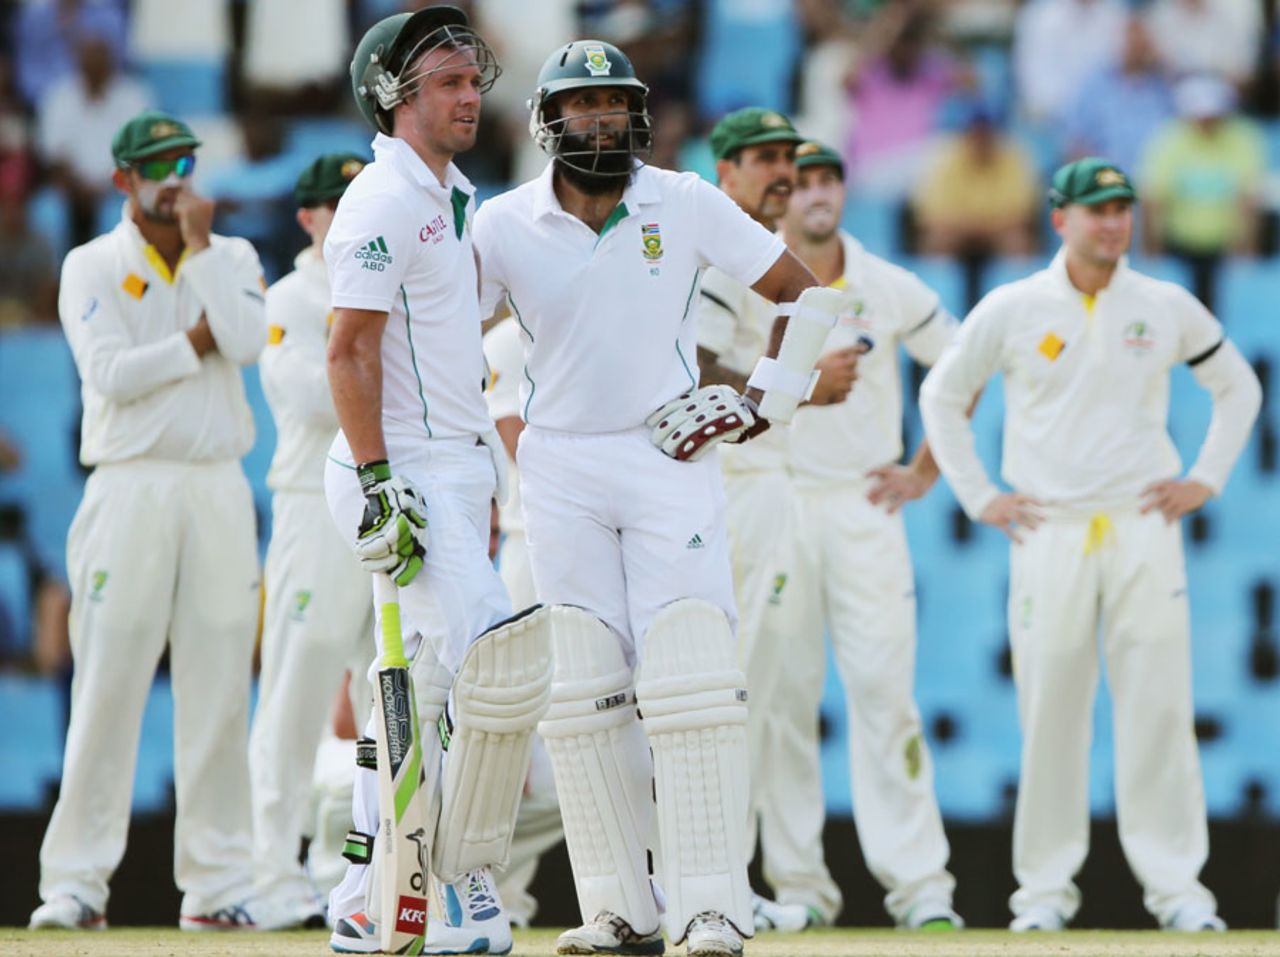 AB de Villiers and Hashim Amla wait for a review verdict, South Africa v Australia, 1st Test, Centurion, 2nd day, February 13, 2014